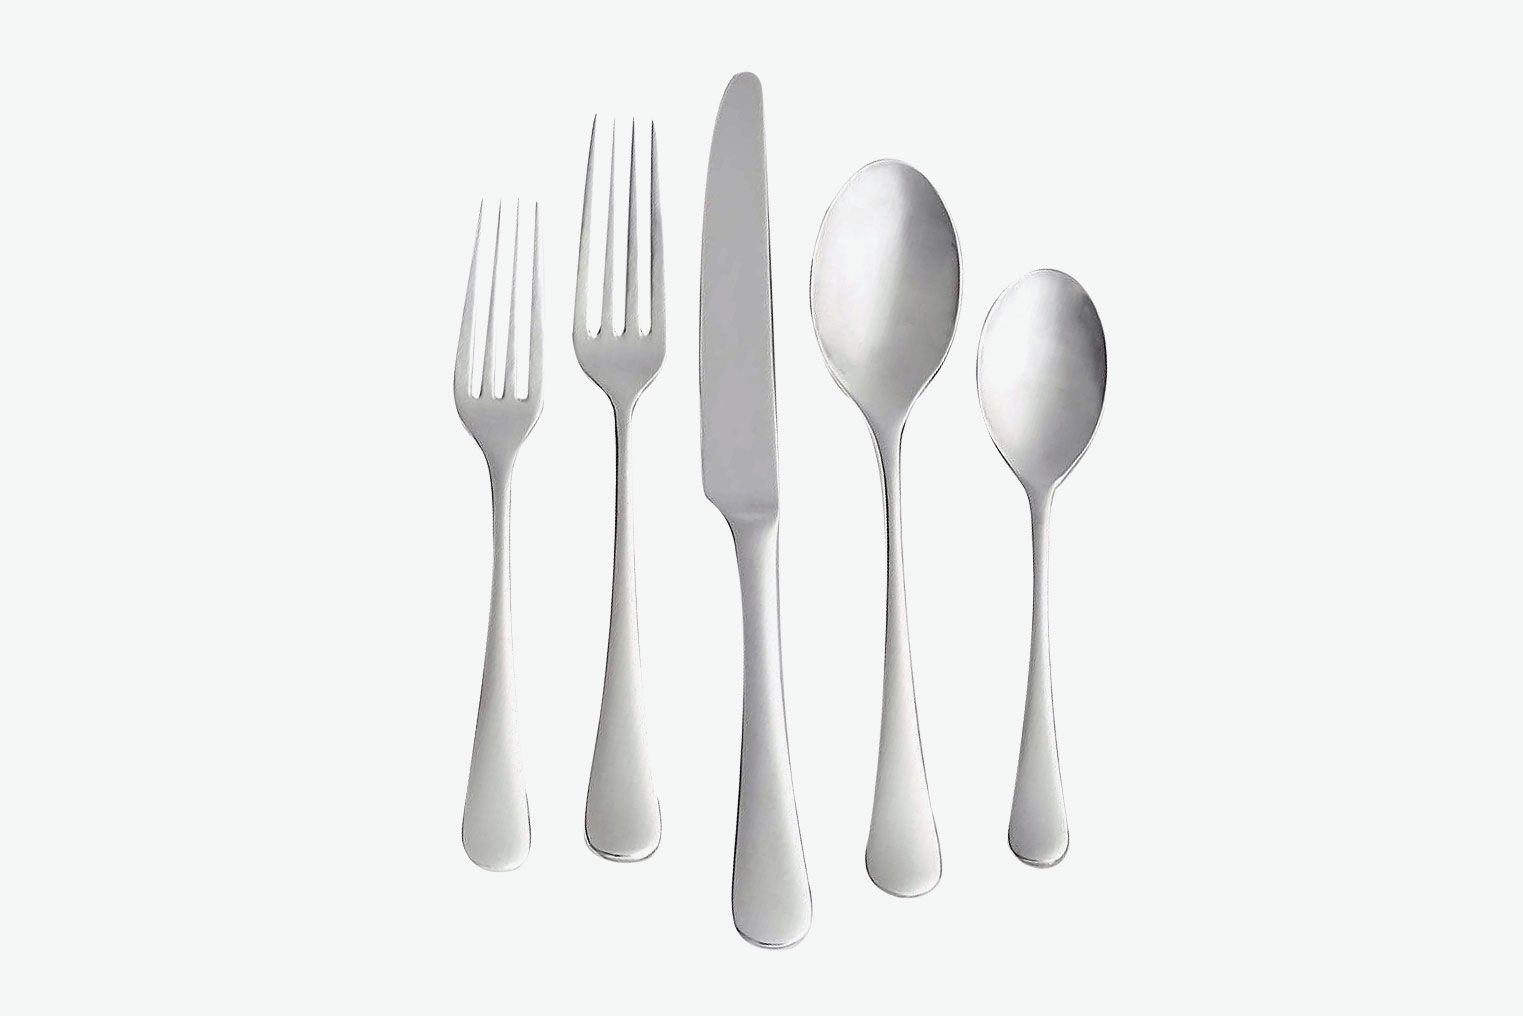 The 15 Best Flatware And Silverware Sets Of 2023 Tested By The Spruce ...